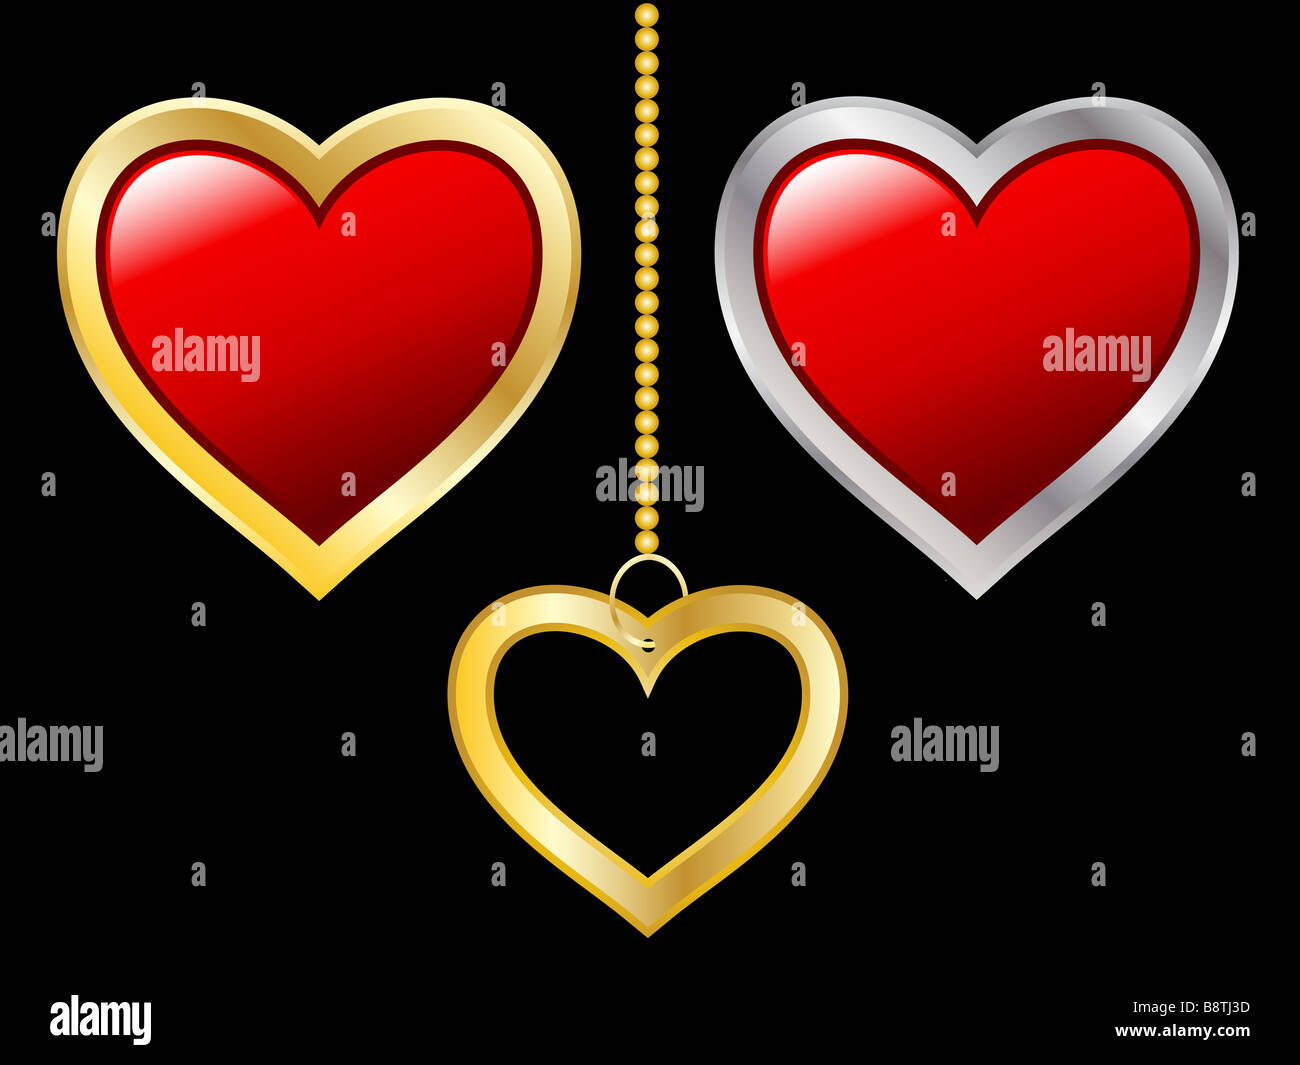 Various heart icons Stock Photo